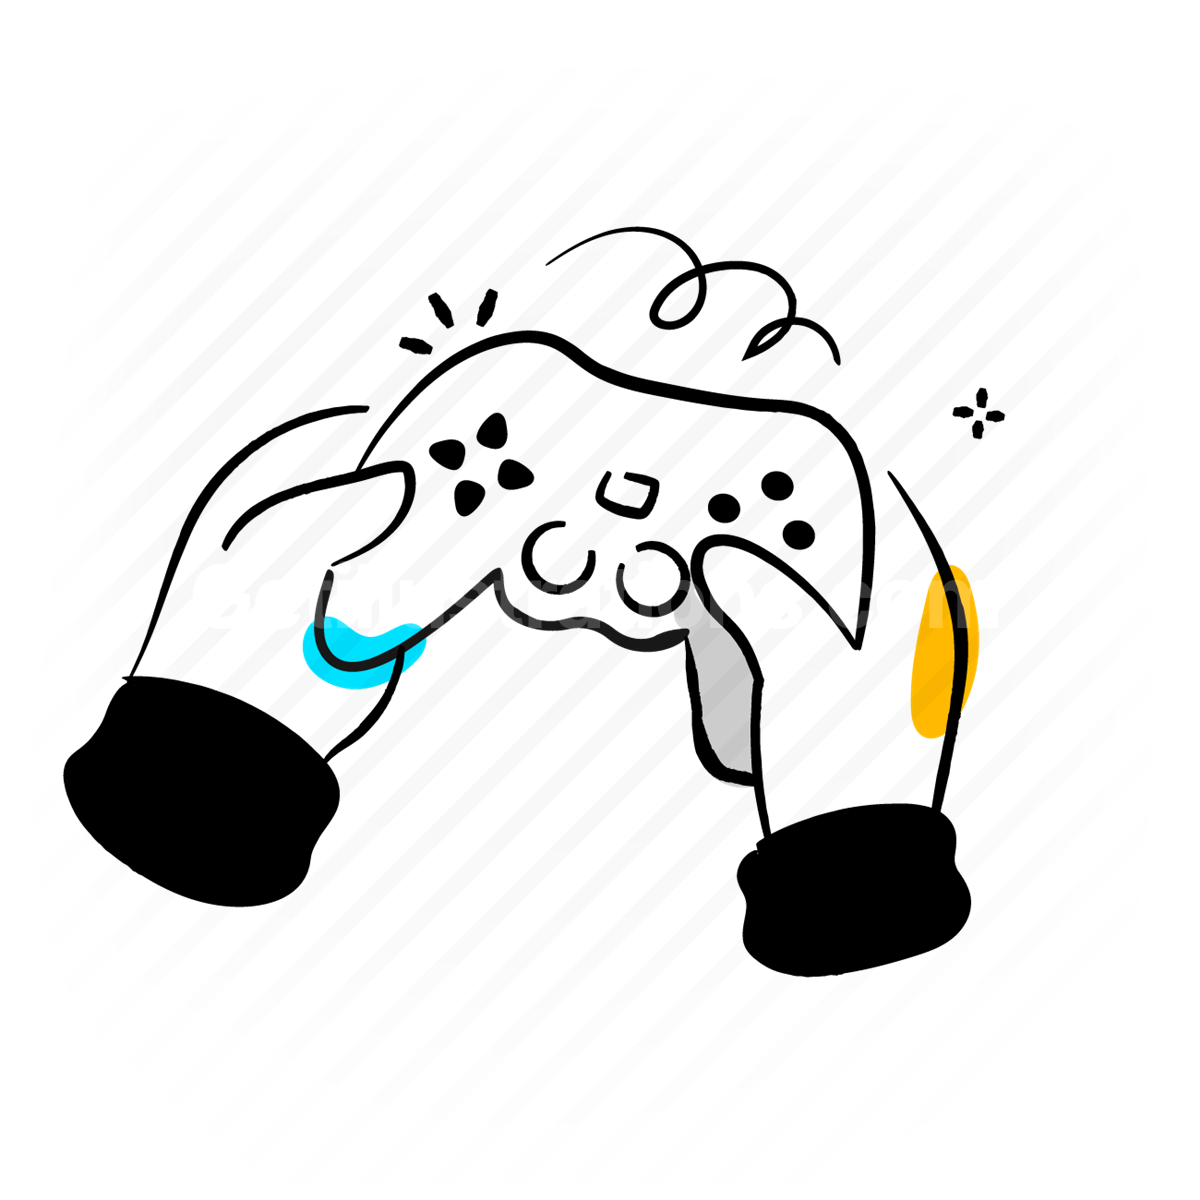 video game, game, controller, electronic, device, hand, gesture